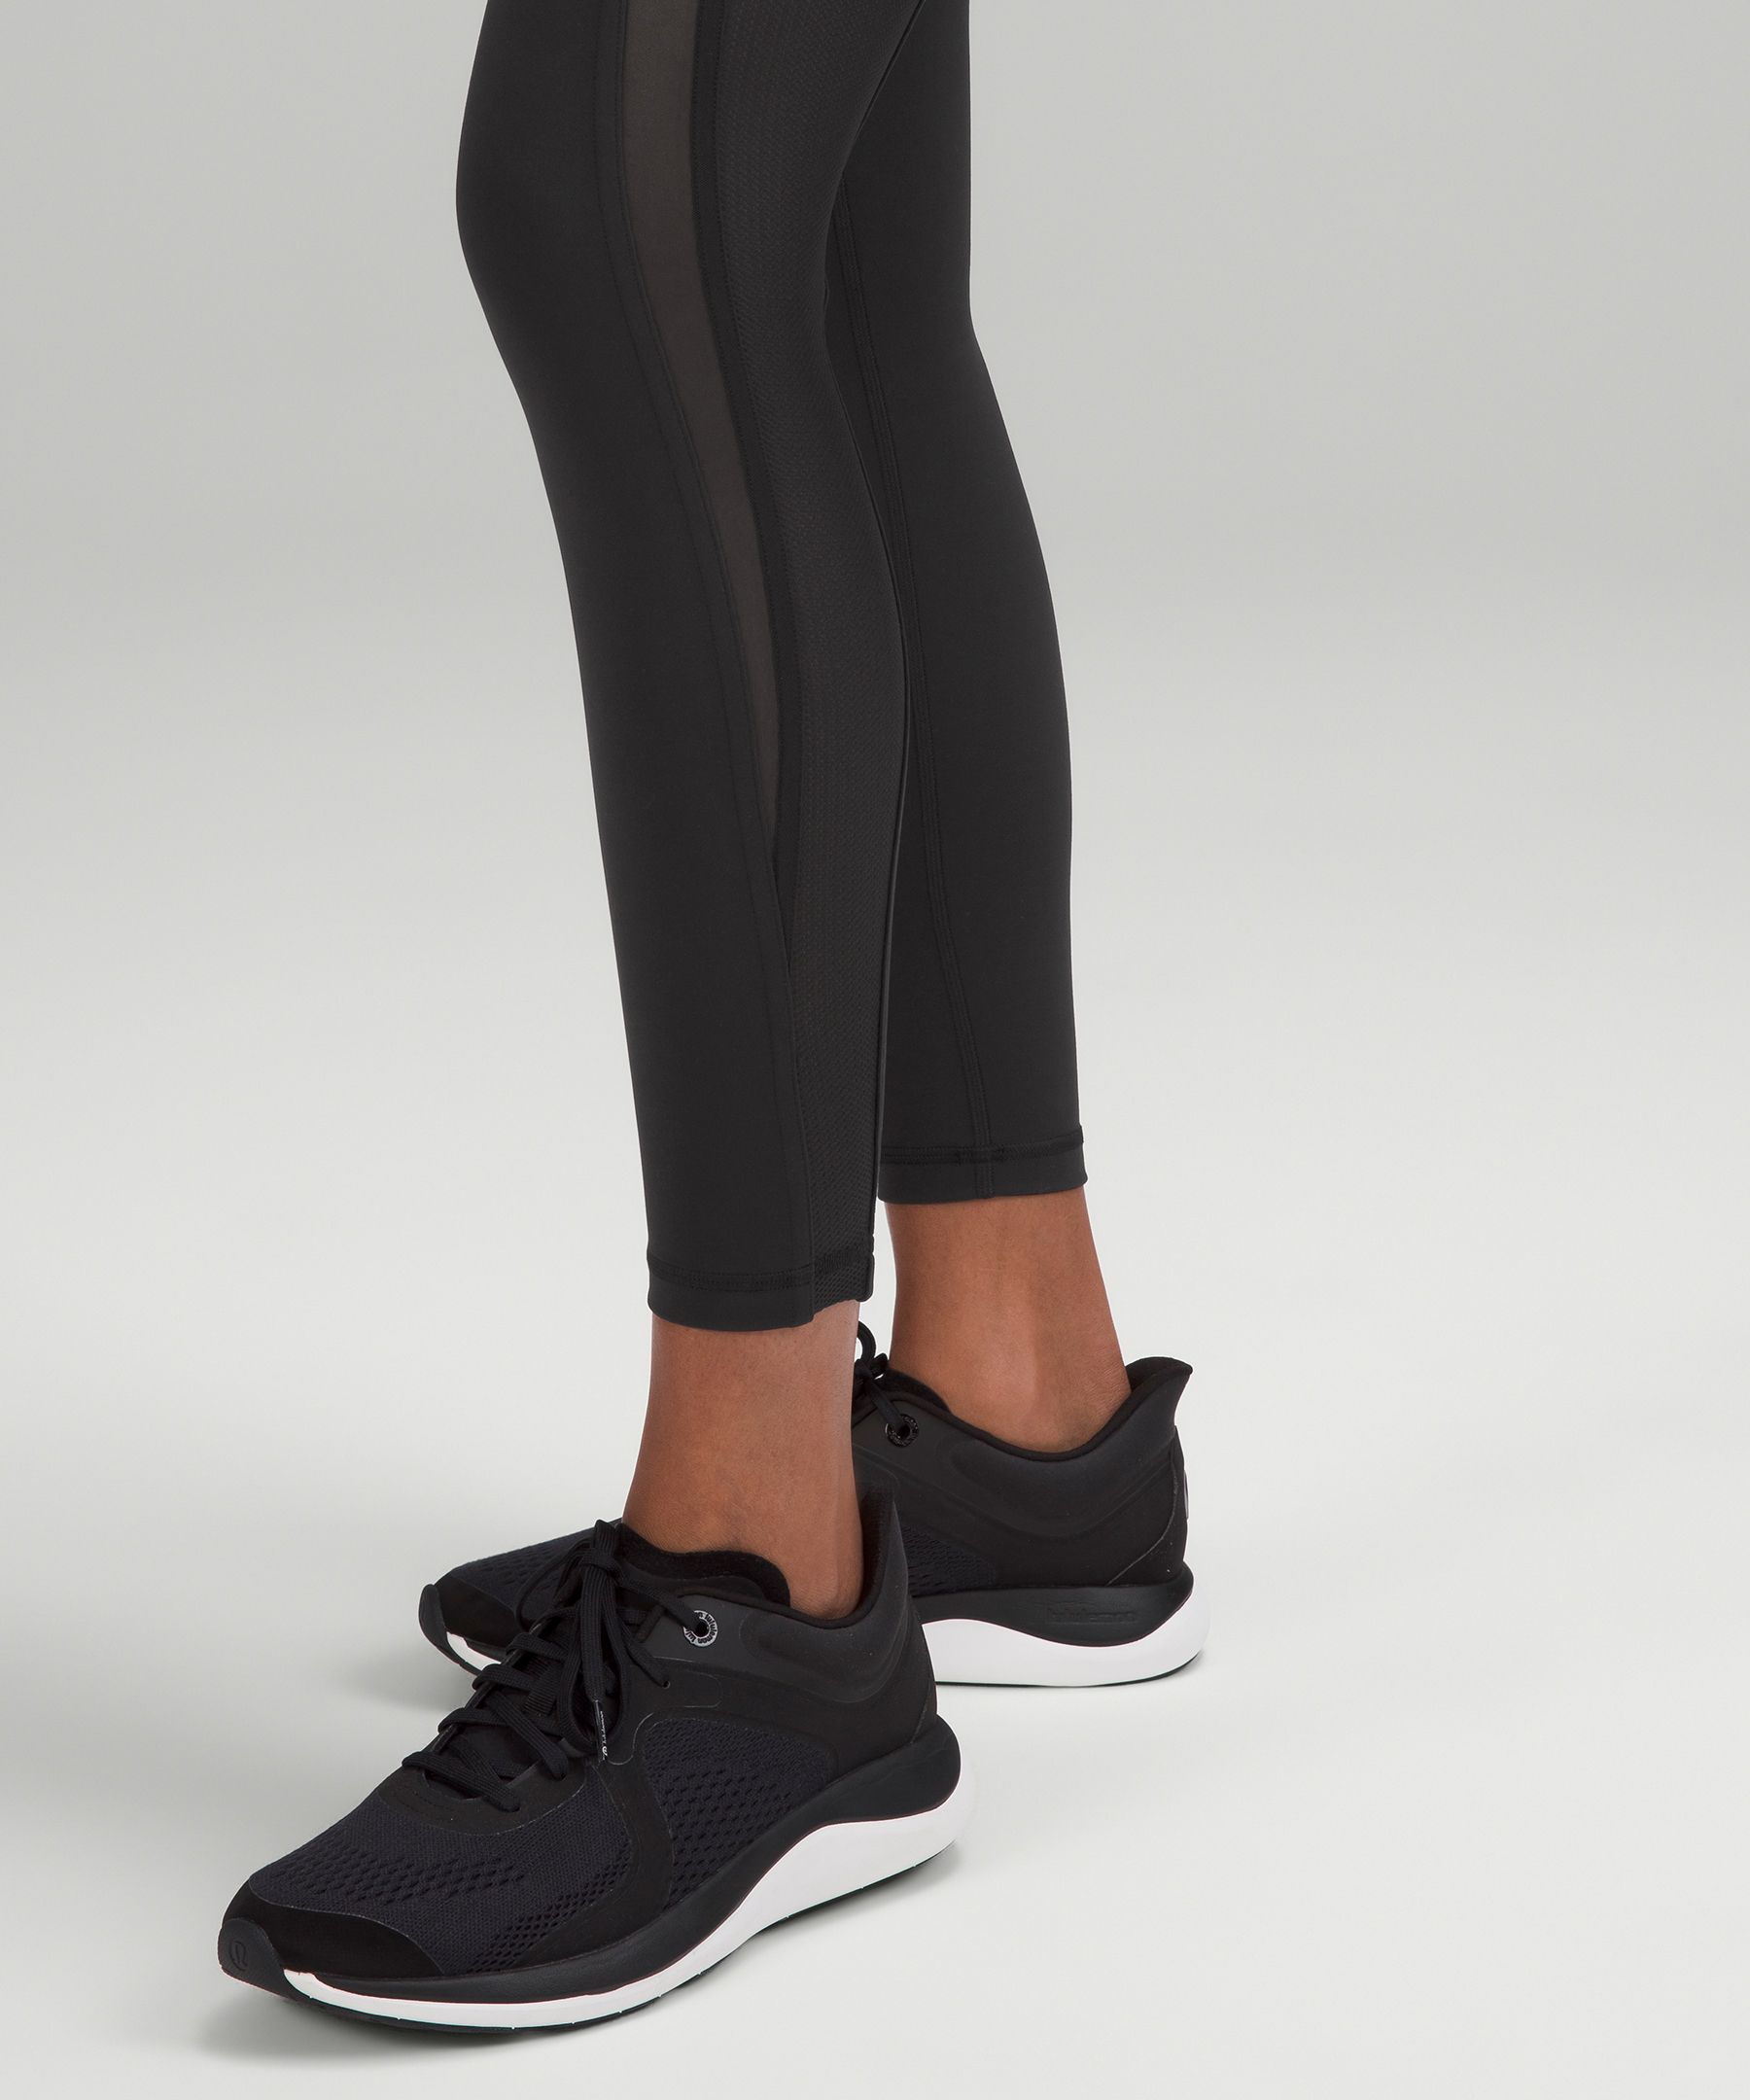 Lululemon athletica Everlux and Mesh Super-High-Rise Training Tight 25, Women's Leggings/Tights